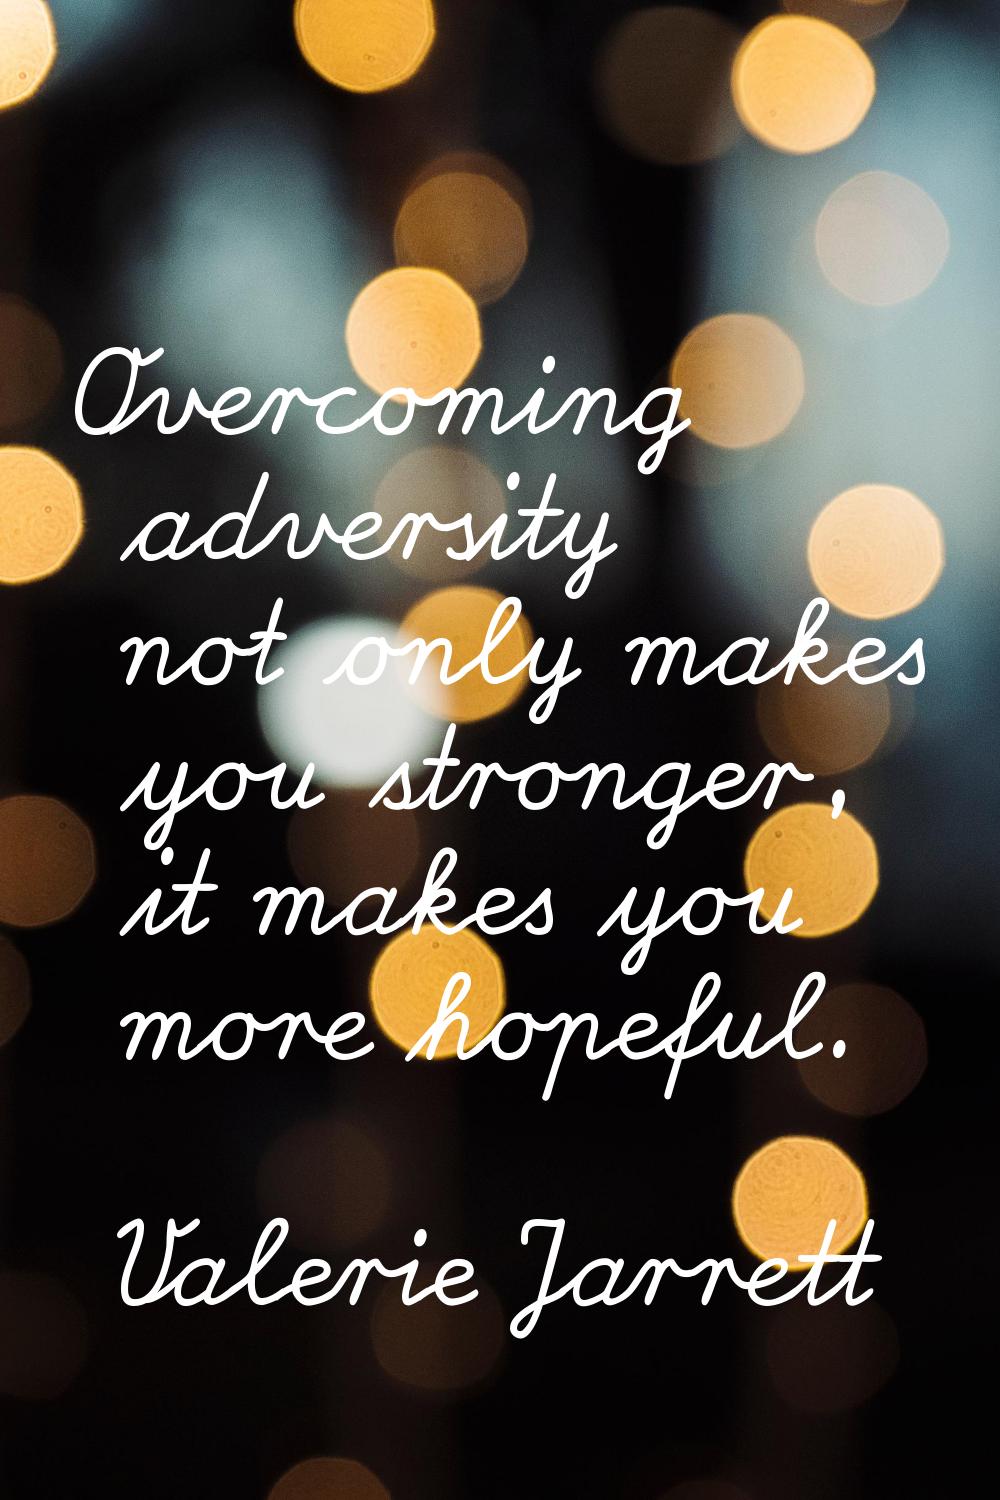 Overcoming adversity not only makes you stronger, it makes you more hopeful.